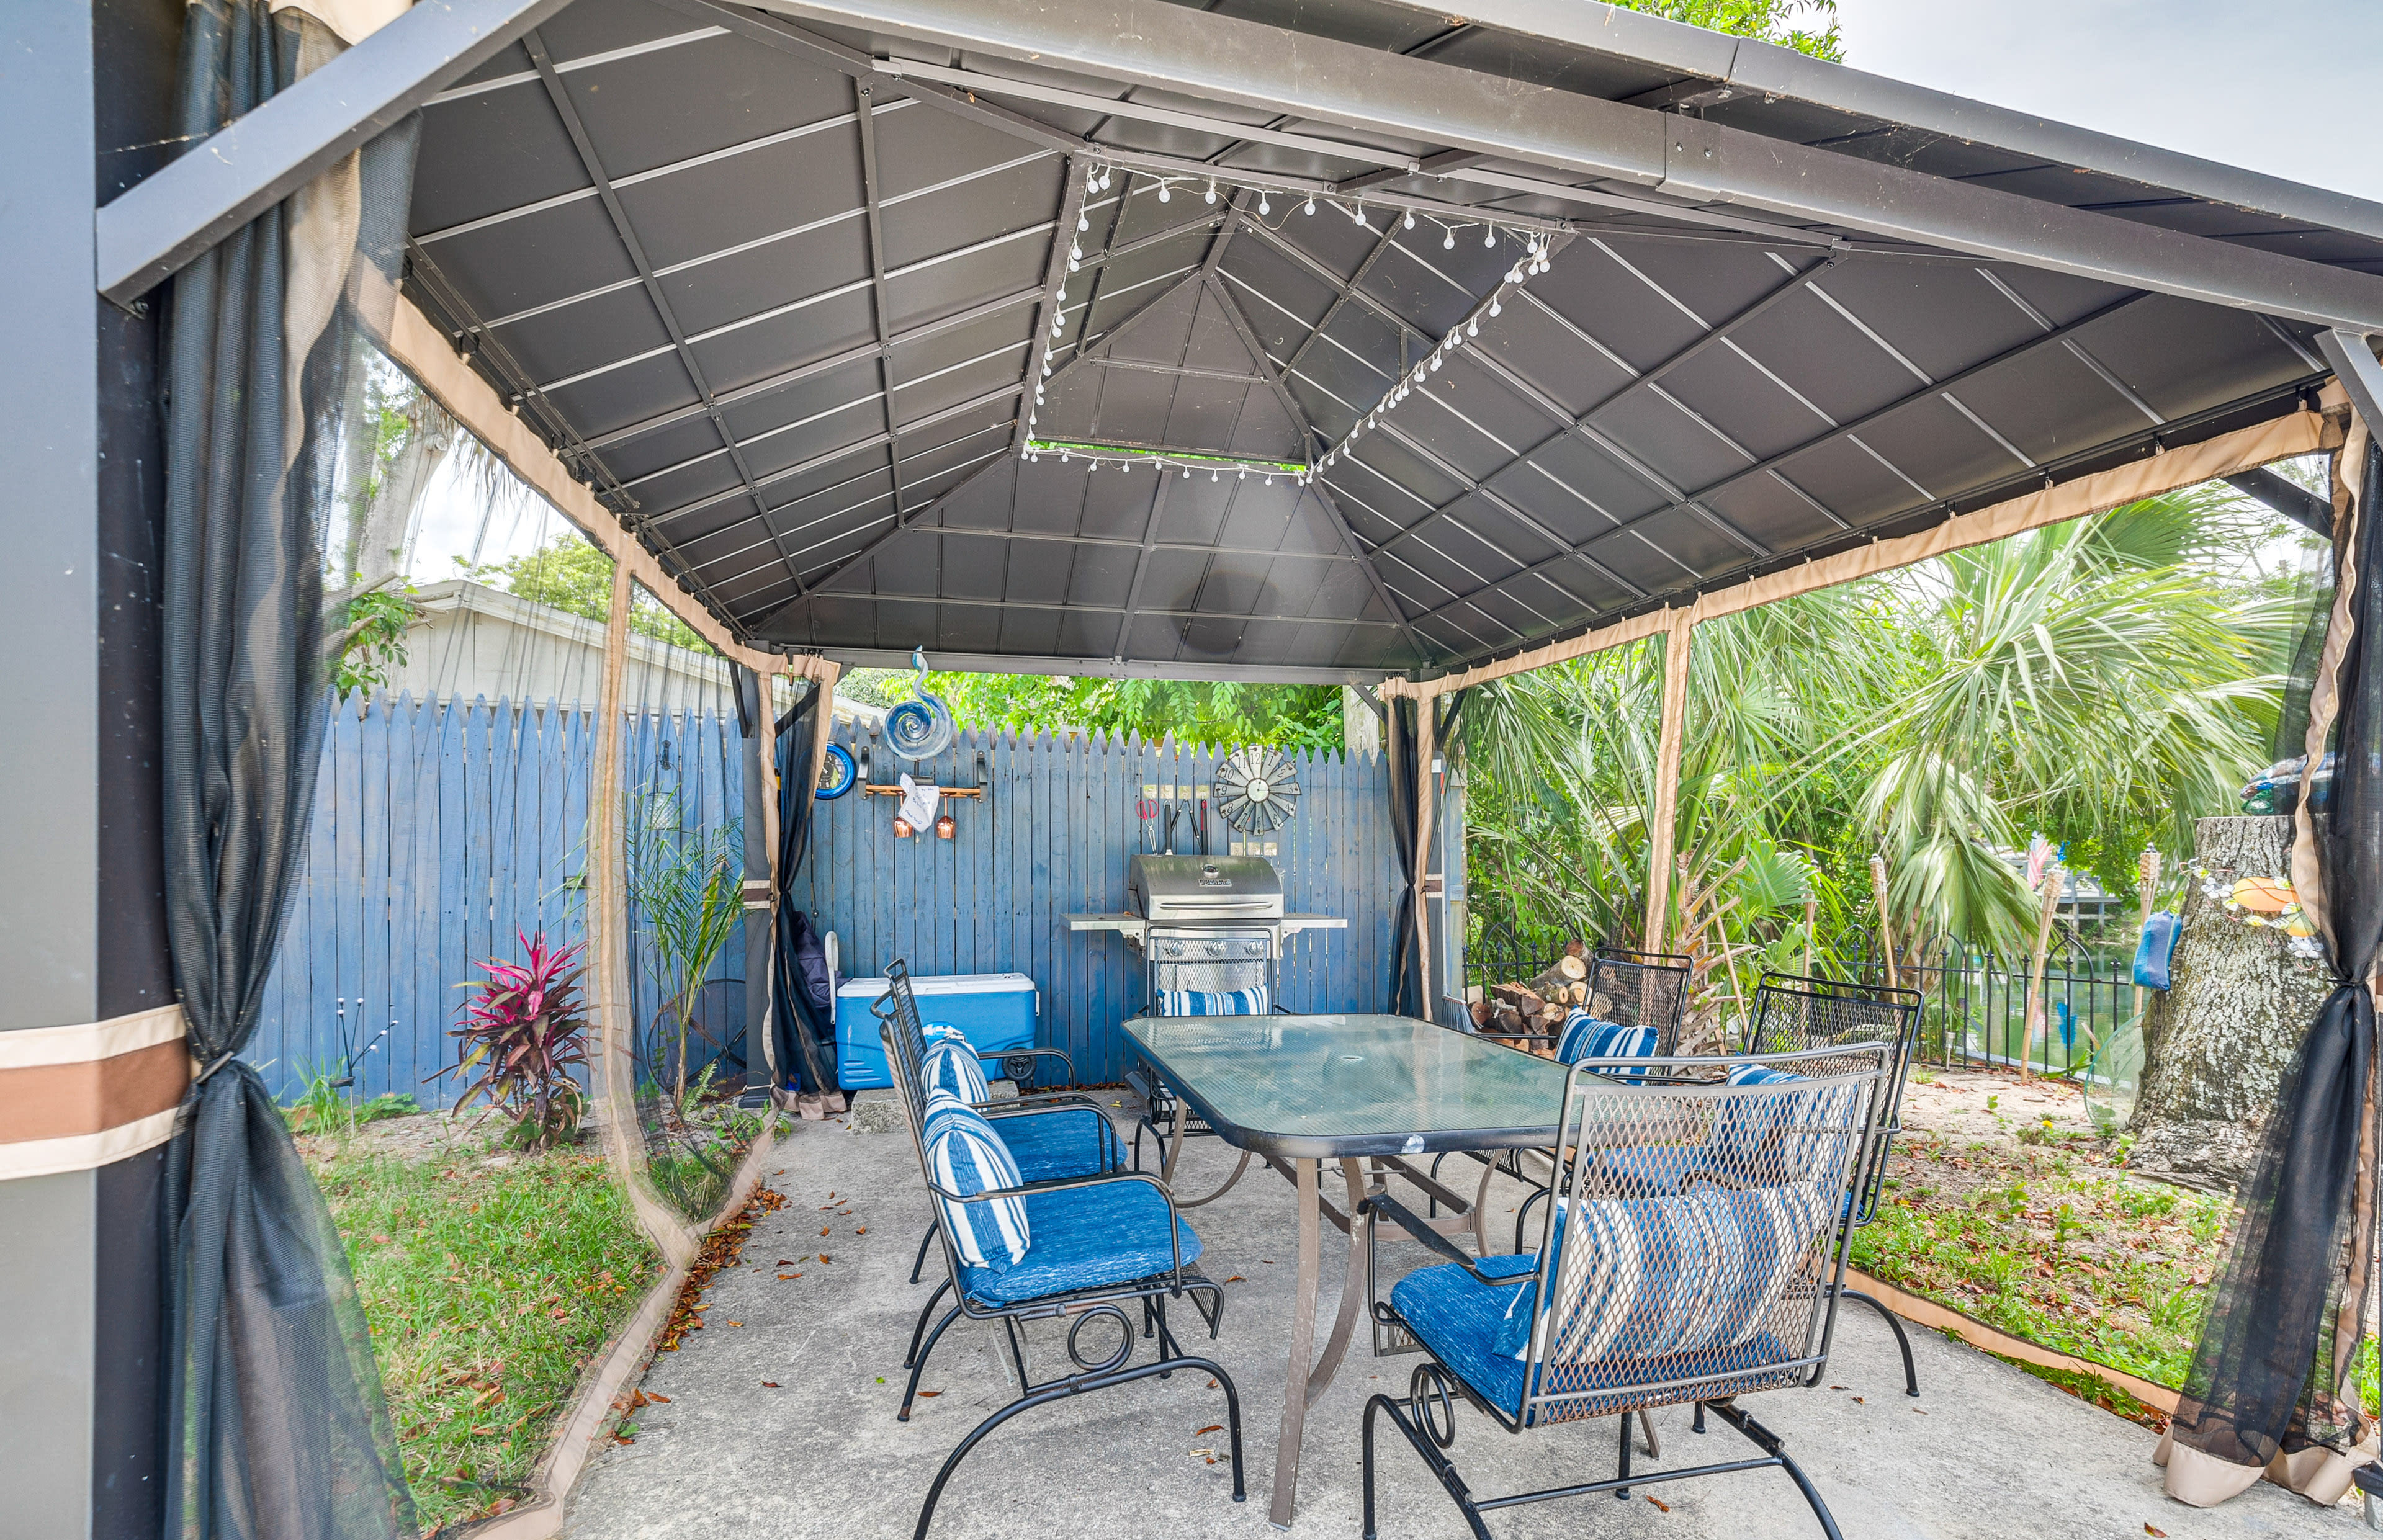 Patio | Outdoor Dining Area | Gas Grill